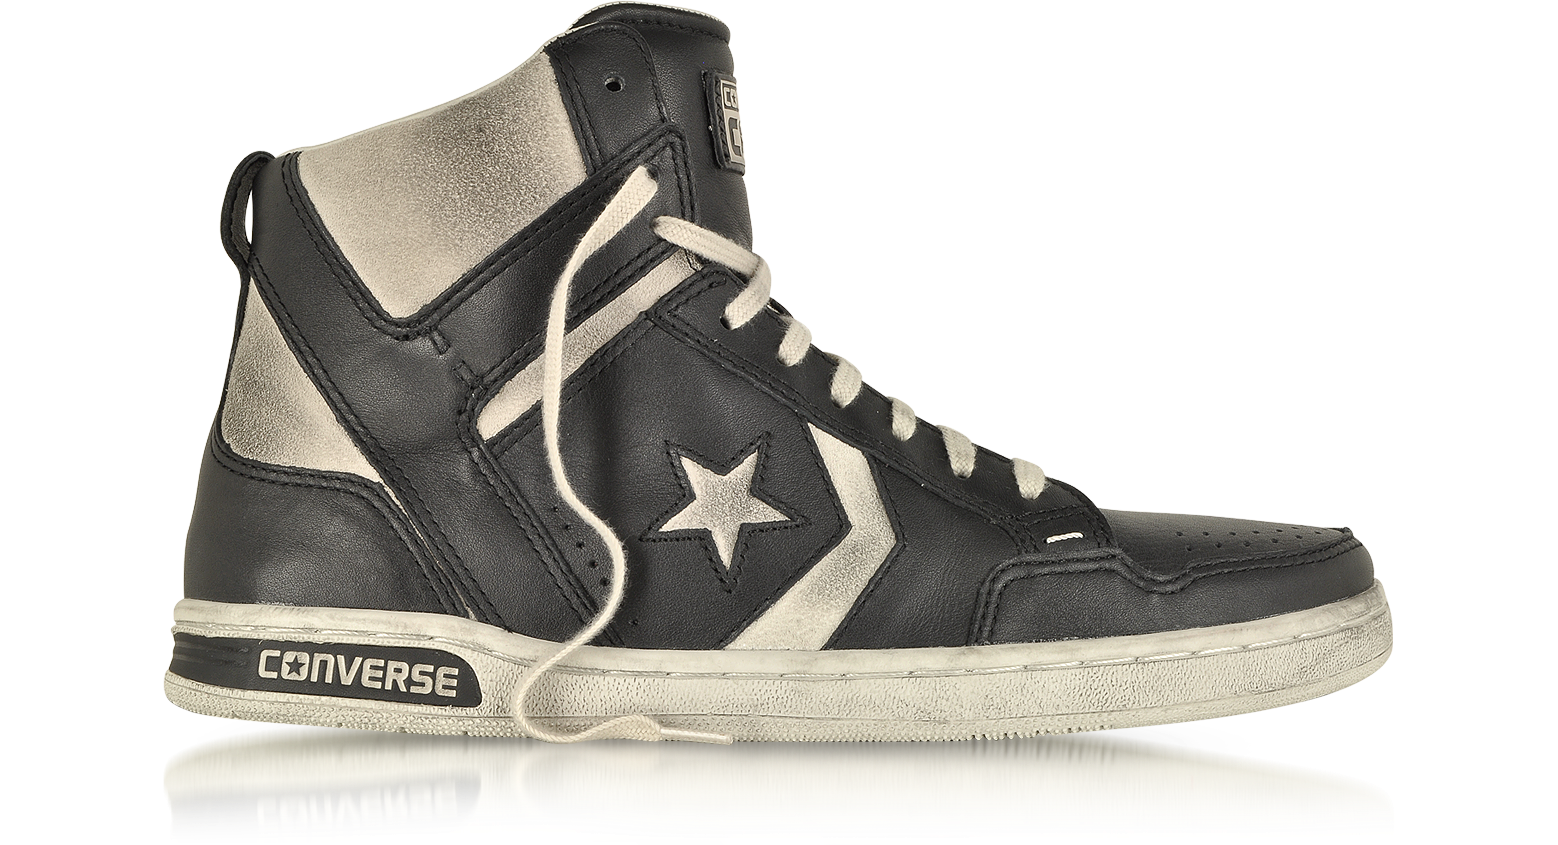 Converse Limited Edition JV Weapon HI Leather and Suede Sneaker 7.5 ( 9.5  WOMENS US| 7.5 UK | 41 EU) at FORZIERI